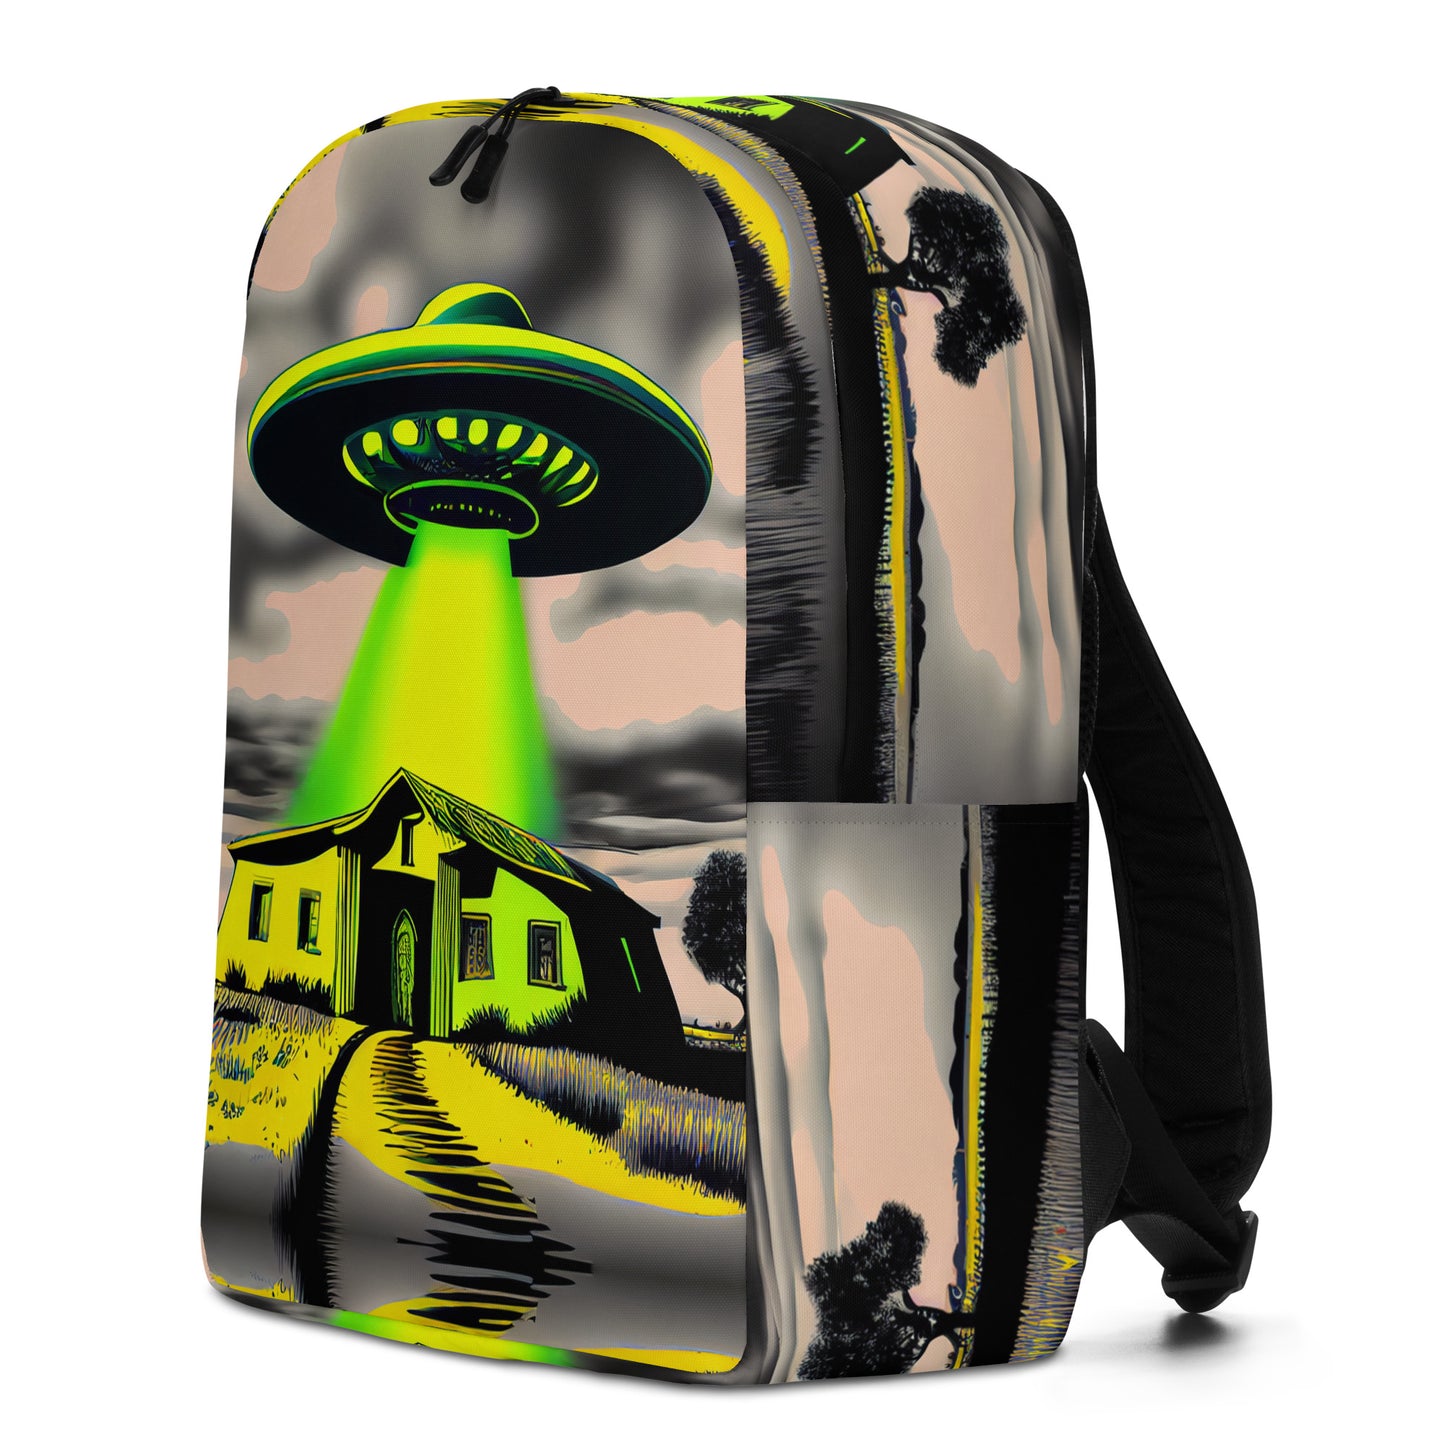 Liquid Sky d-vices / Ufo Academy Small Gearbag / Backpack